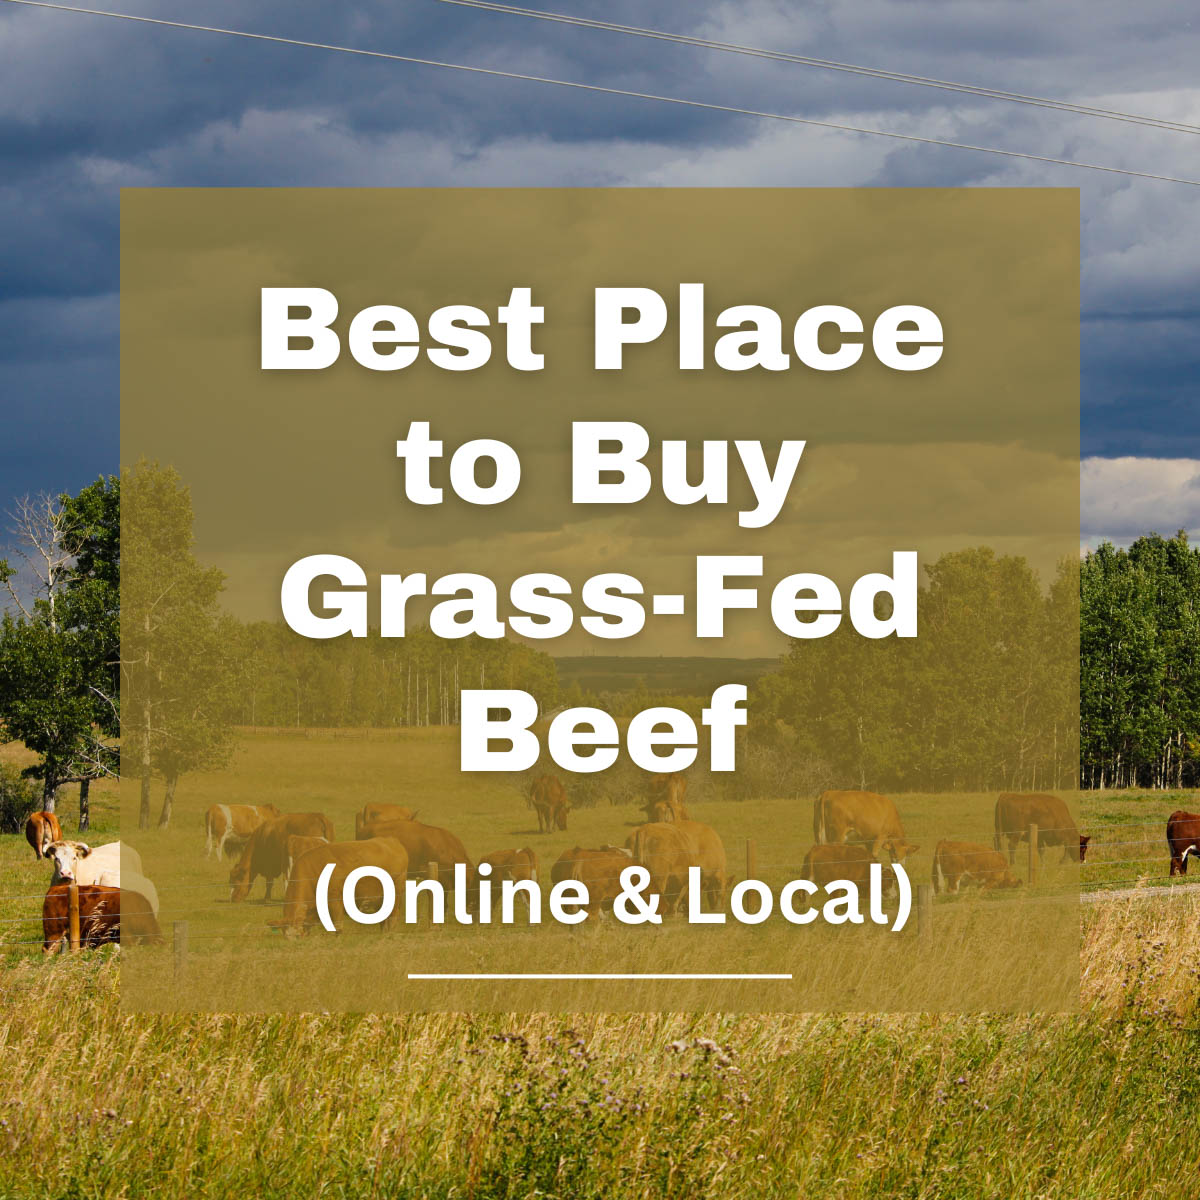 Grass-fed cattle grazing on pasture. Overlaid with the text: Best Place to Buy Grass-Fed Beef (Online & Local)